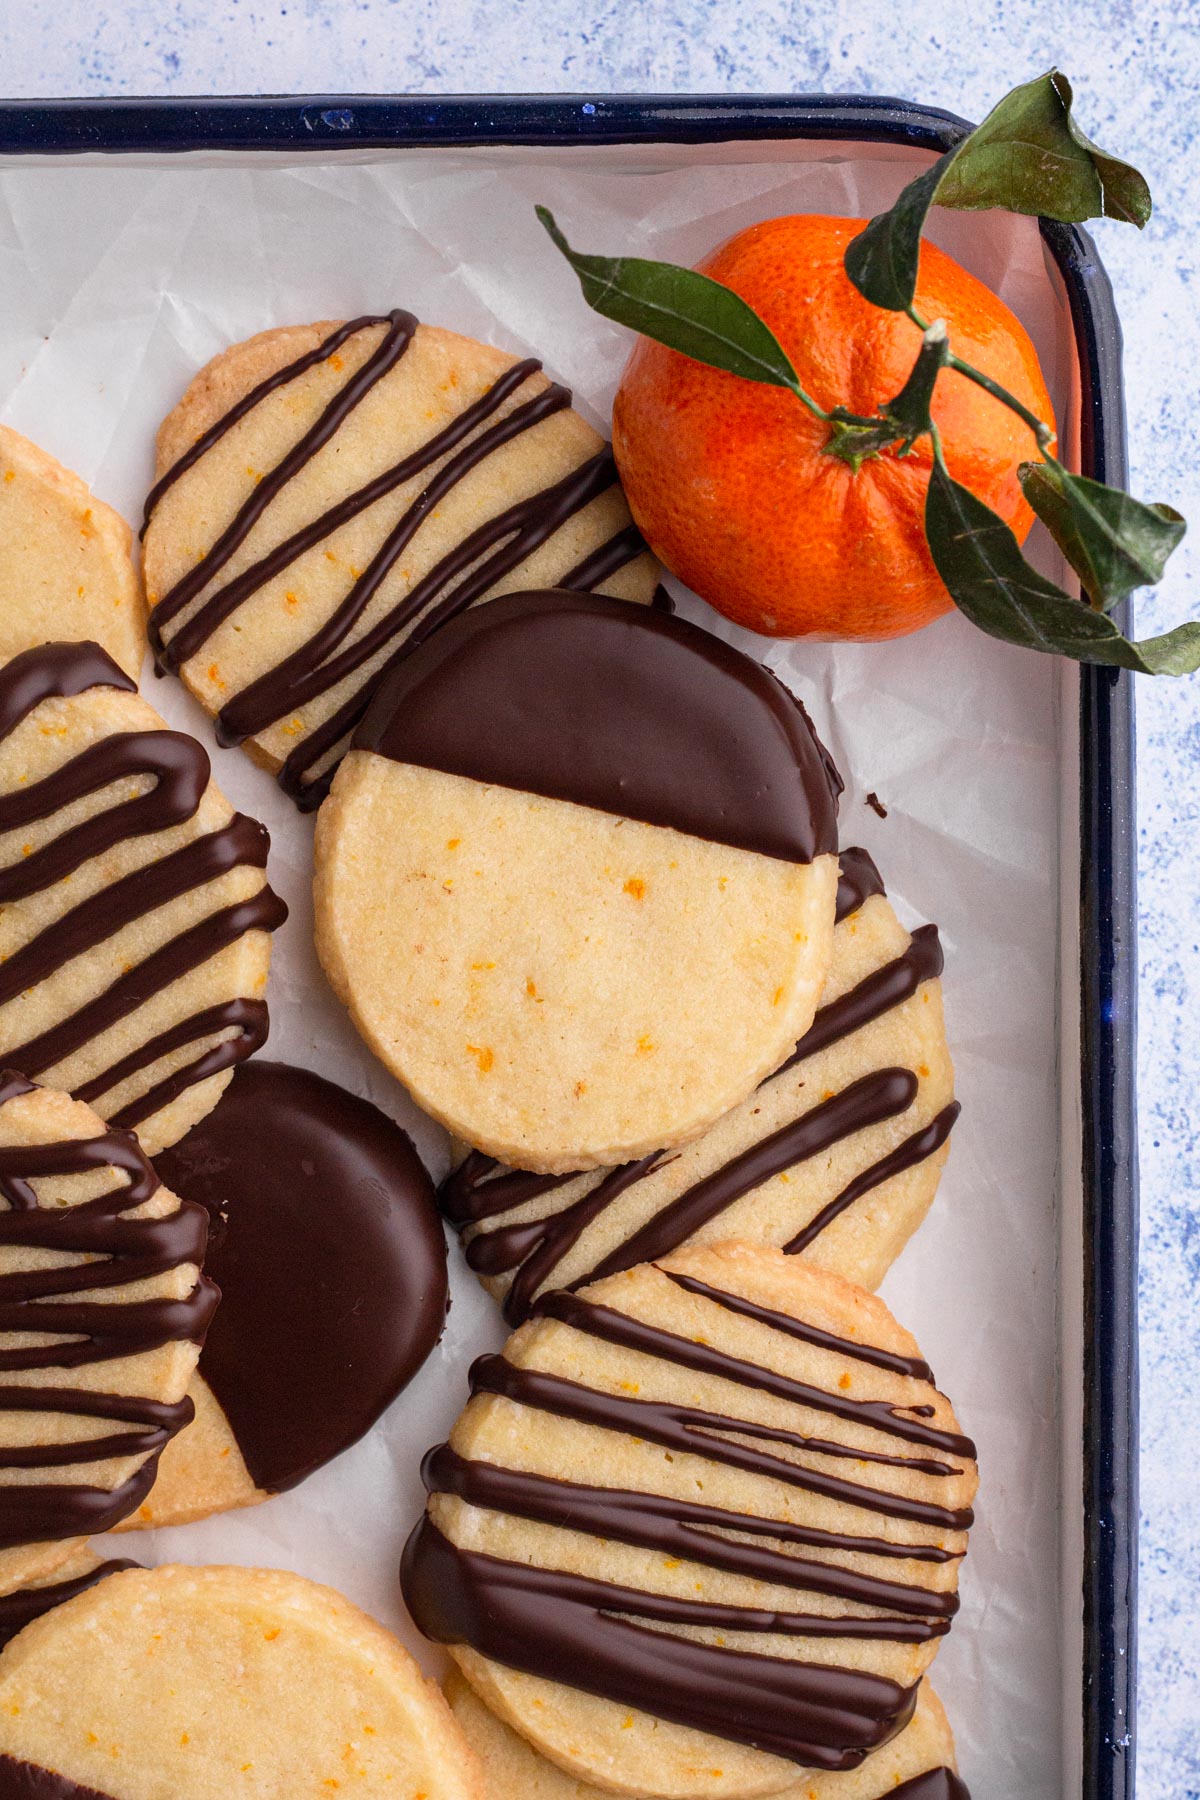 Overhead view of chocolate-dipped shortbread cookies stacked on a tray with an orange.